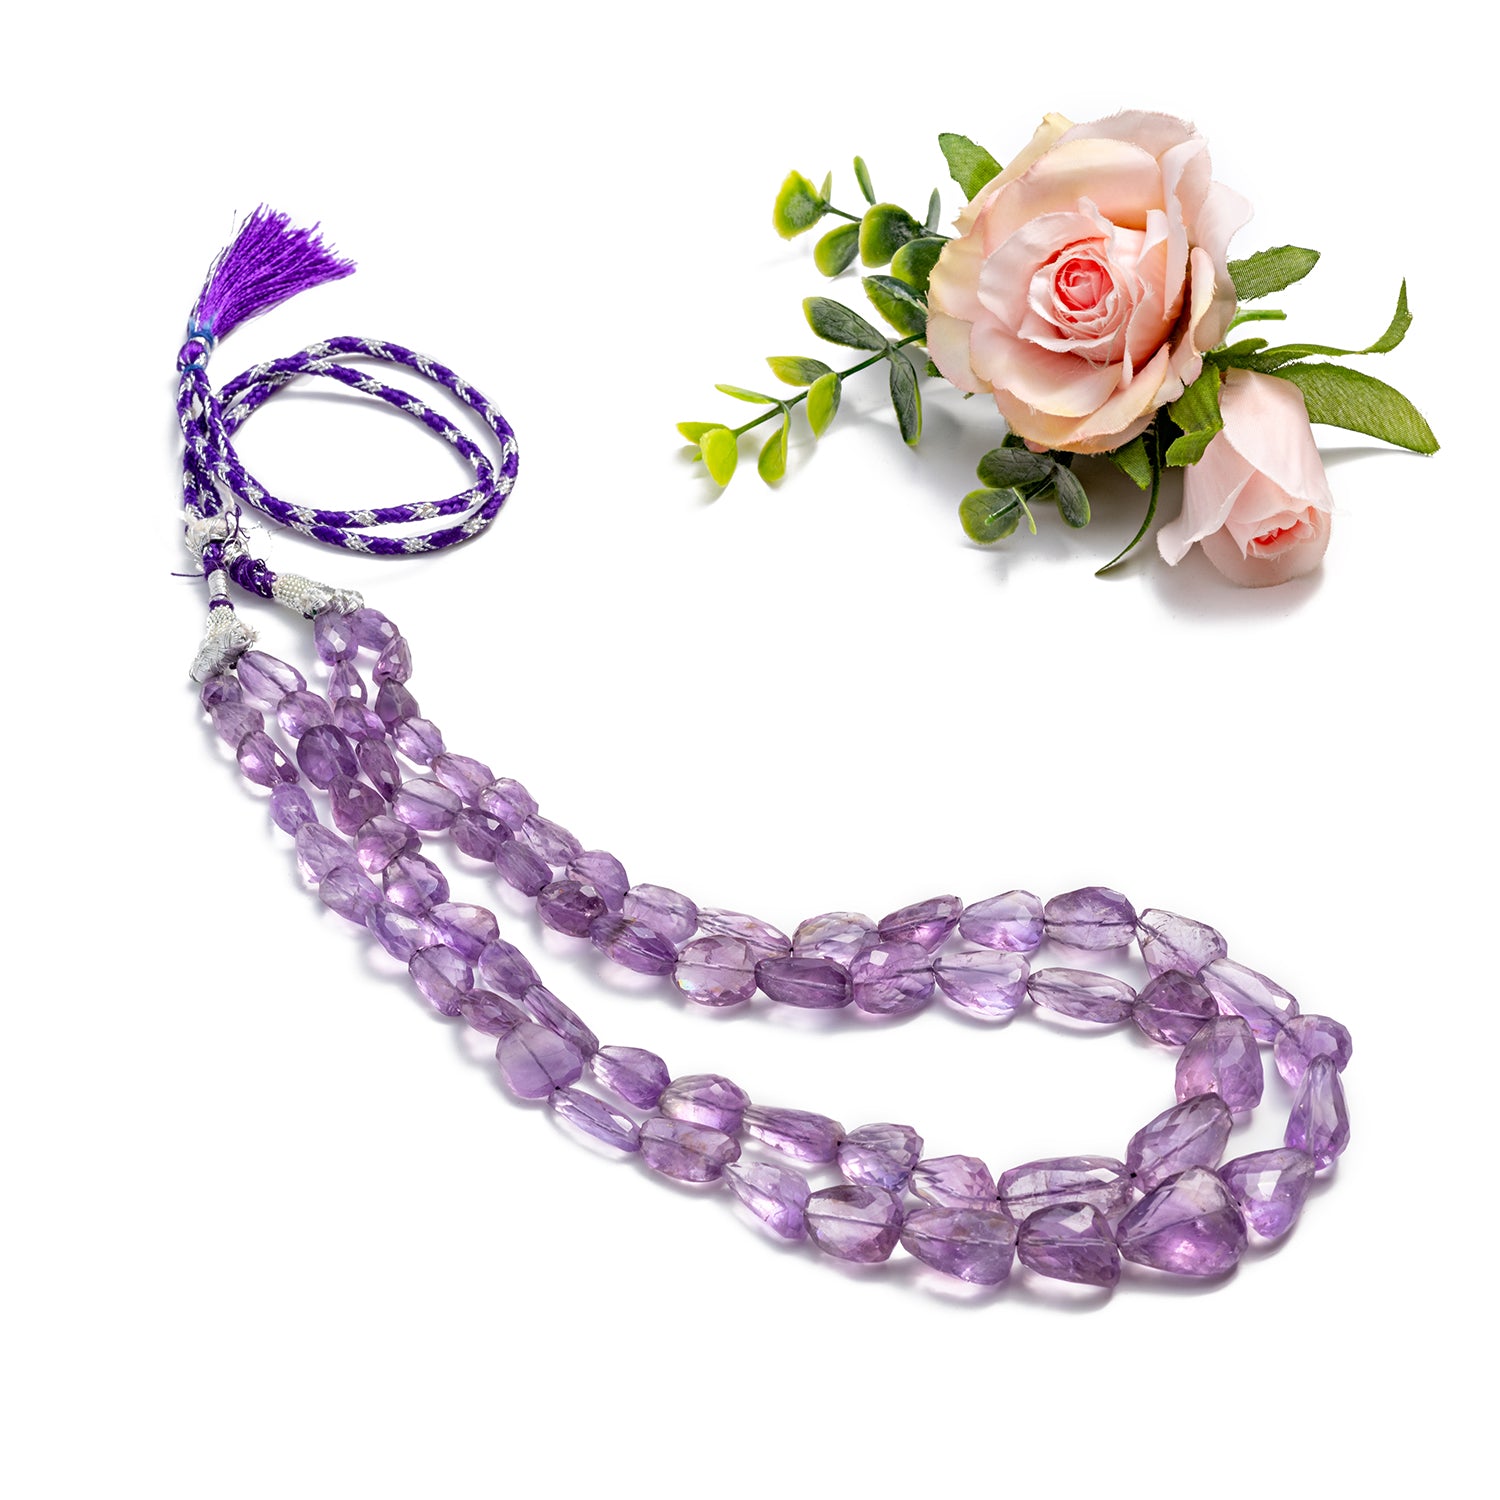 Amethyst Multishaped Two Layer Necklace